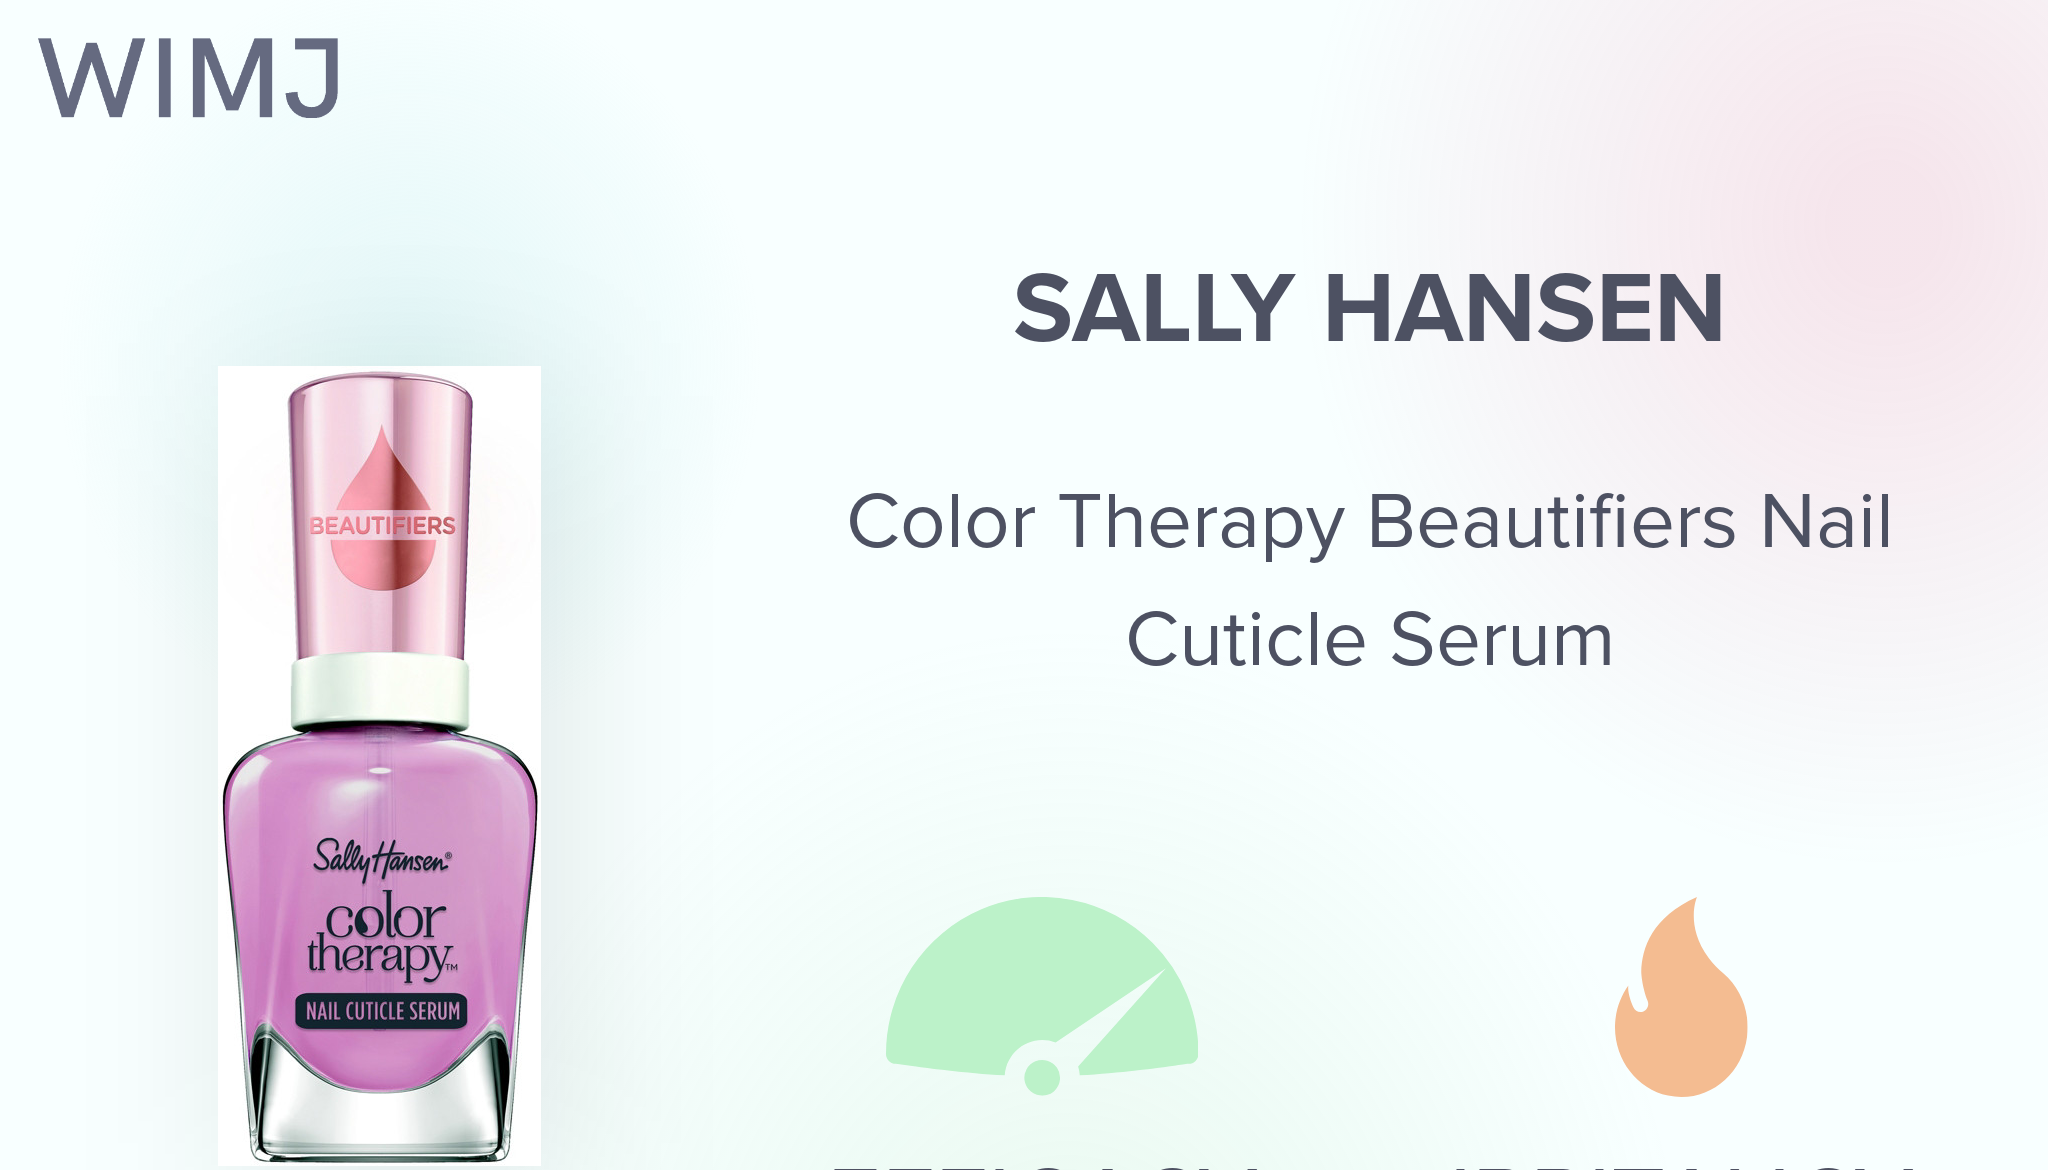 Review: Sally Hansen - Color Therapy Beautifiers Nail Cuticle Serum - WIMJ